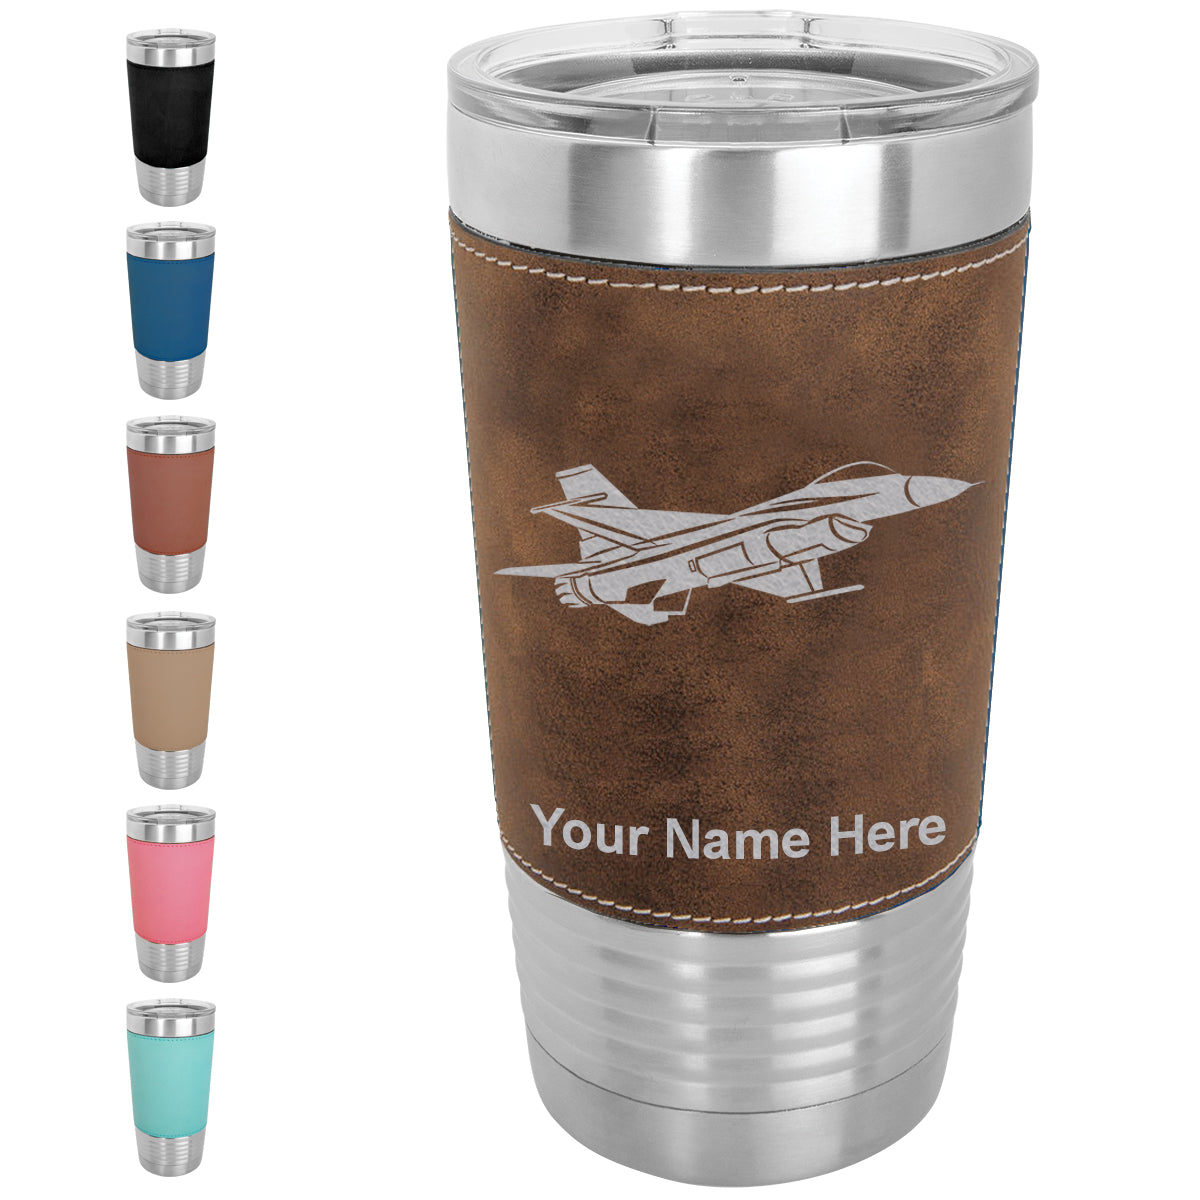 20oz Faux Leather Tumbler Mug, Fighter Jet 1, Personalized Engraving Included - LaserGram Custom Engraved Gifts